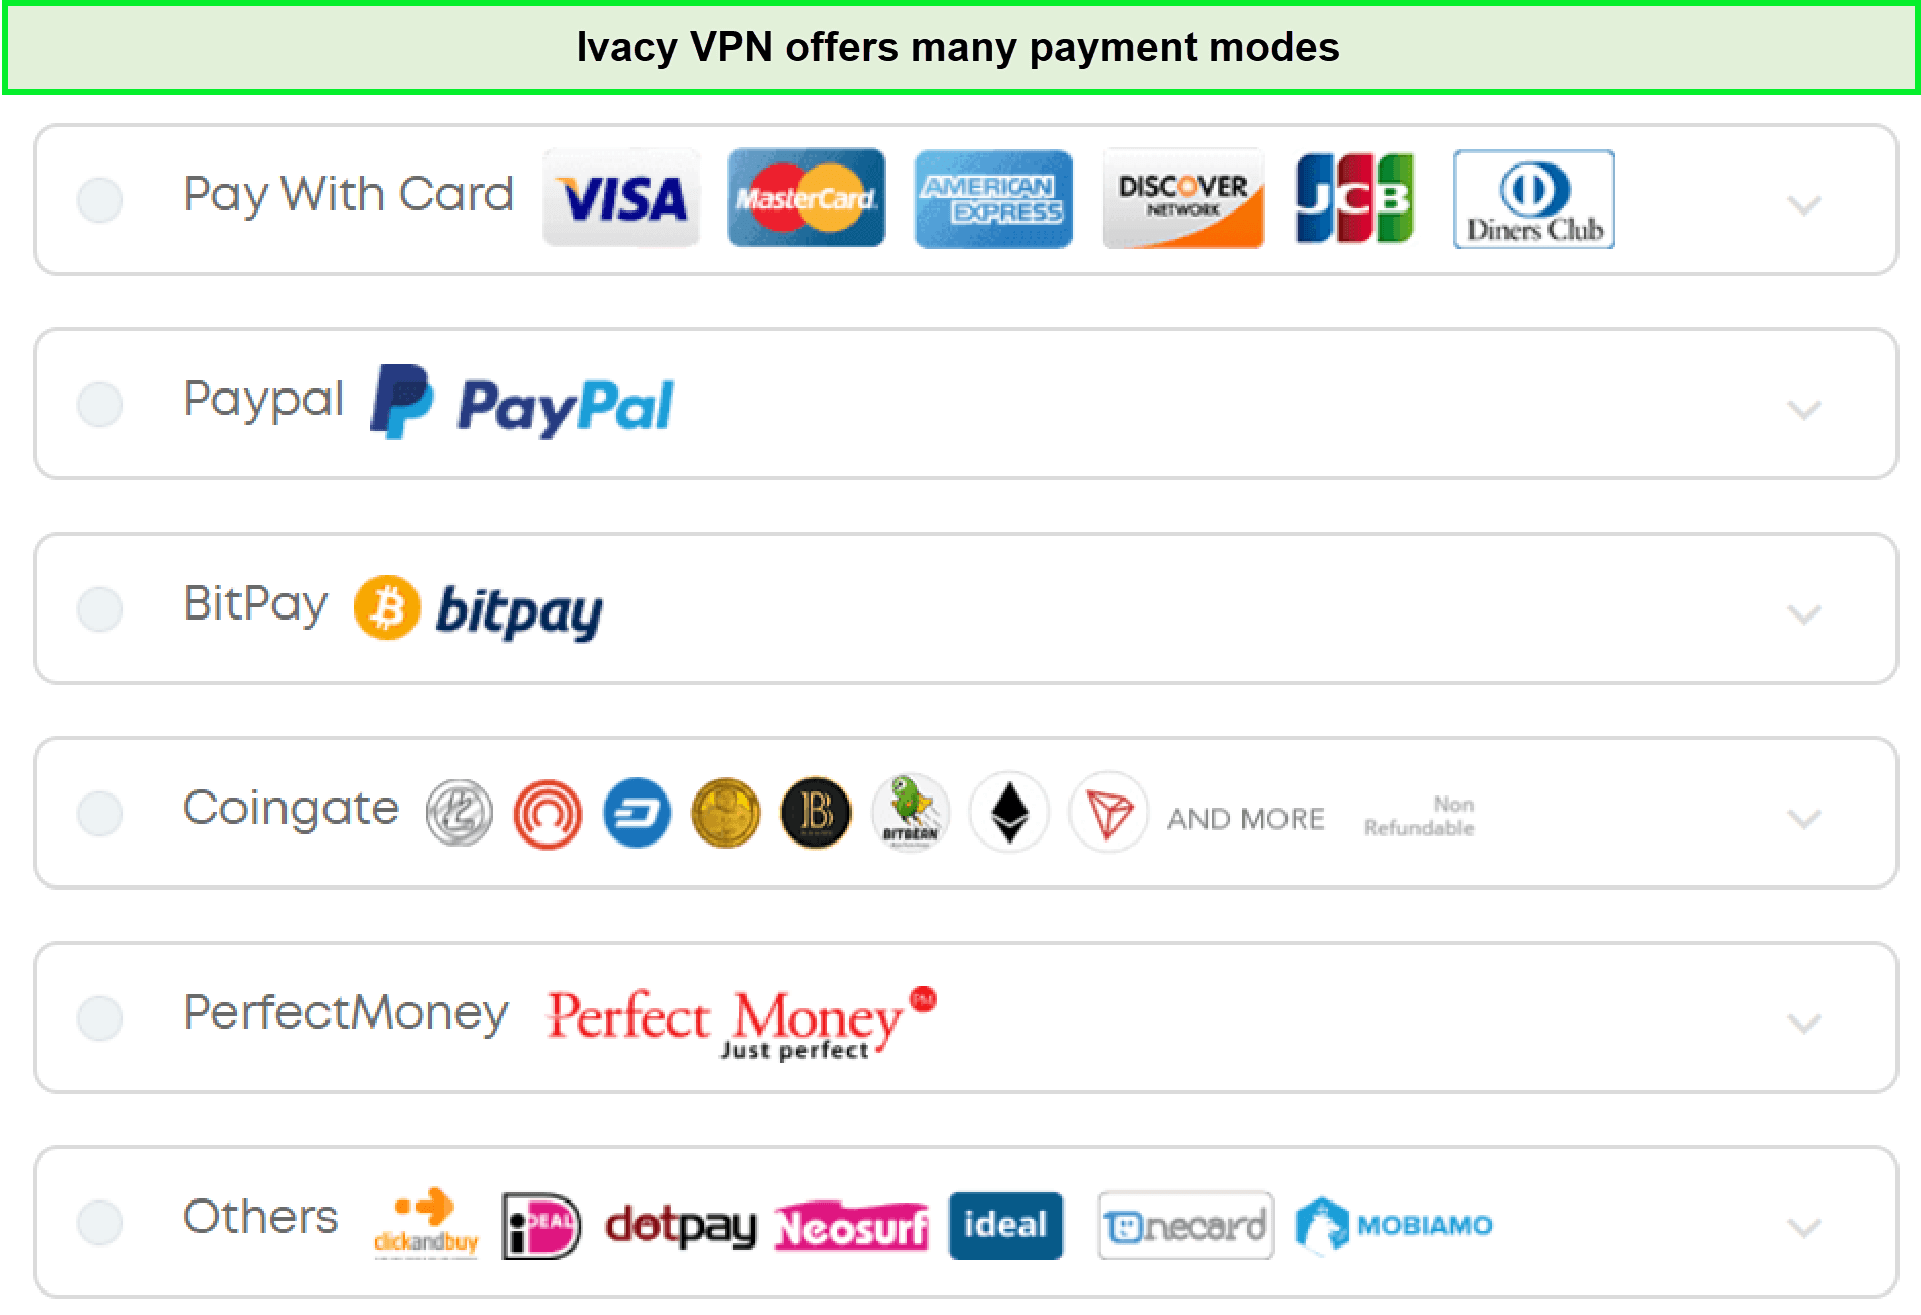 ivacy-payment-modes-in-Spain